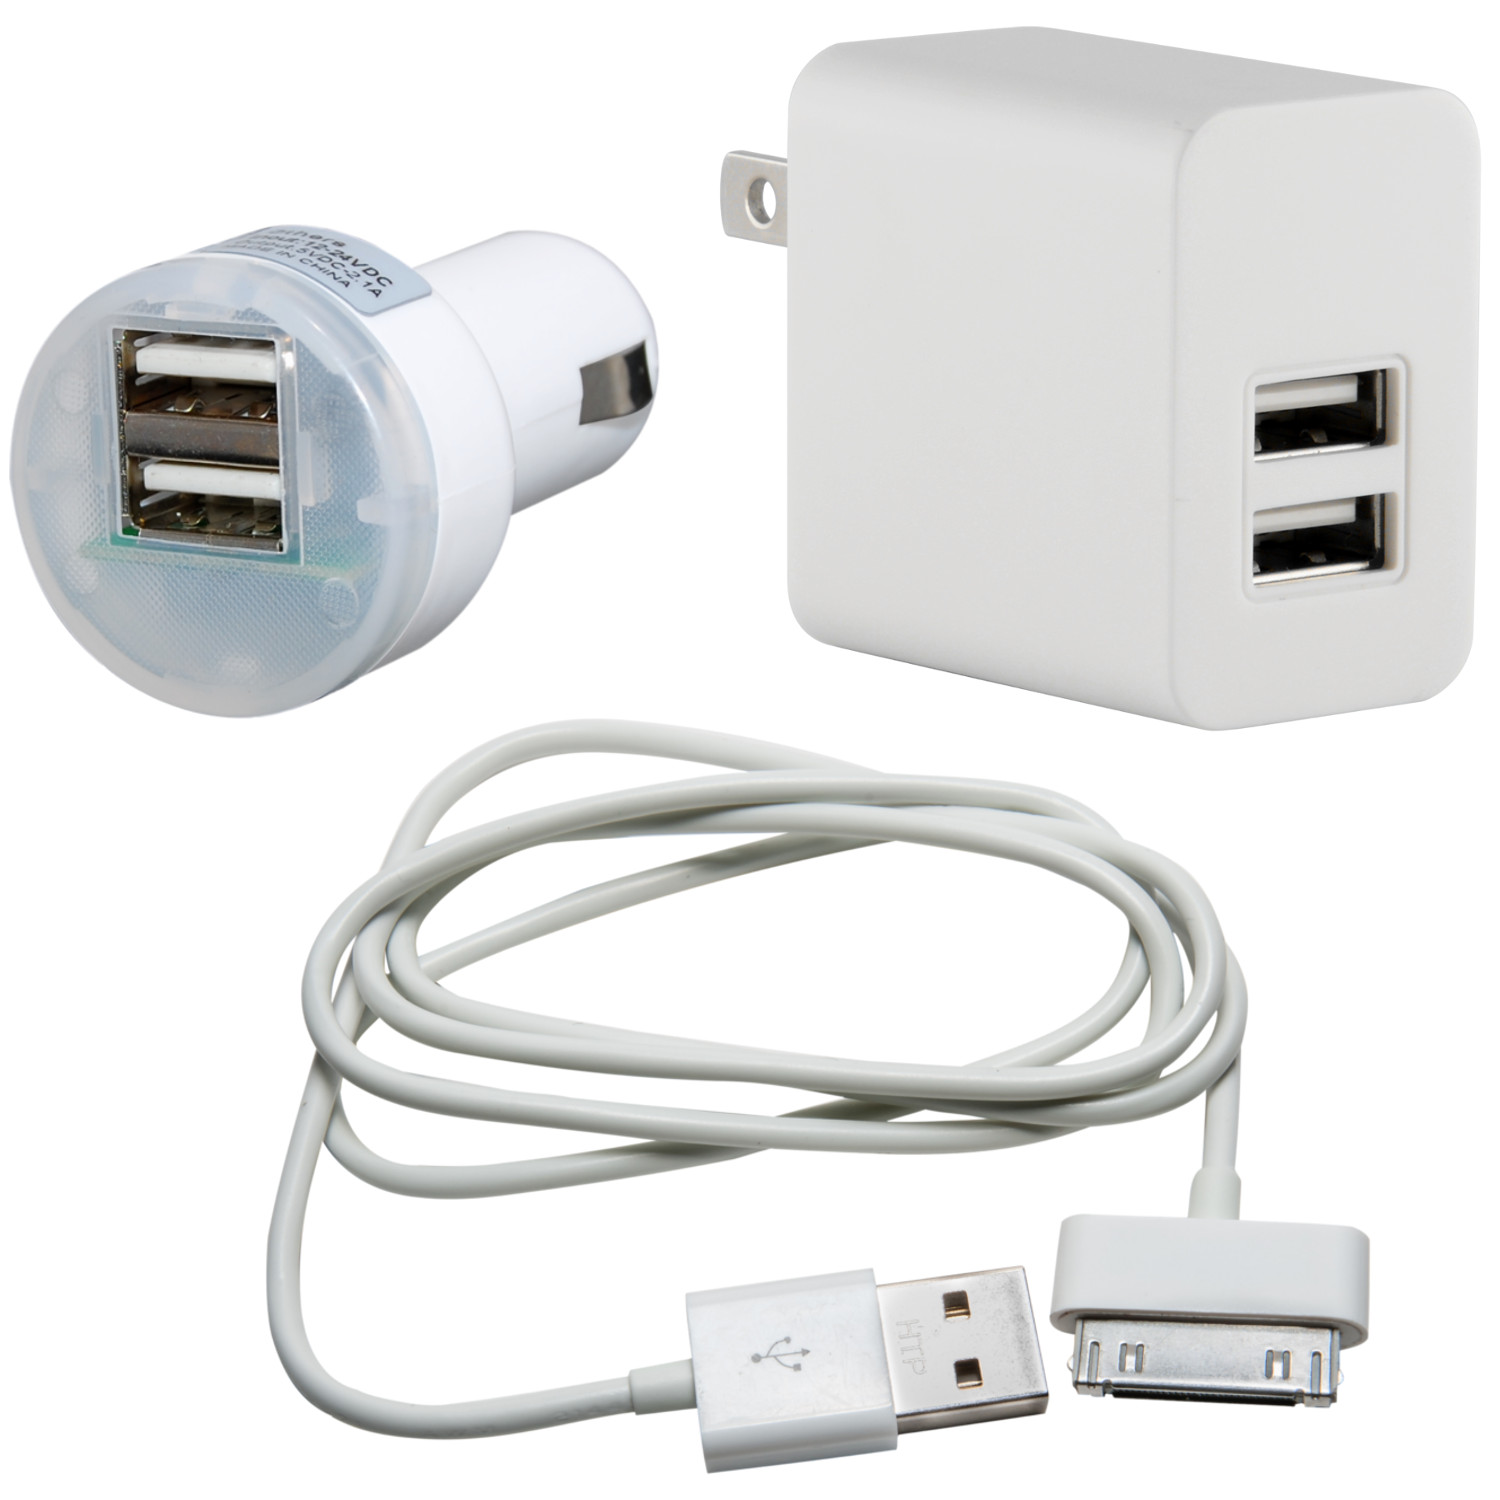 USB Car + AC Wall Charger + Data/Charging Cable for iPad & iPad 2 - $5. ...